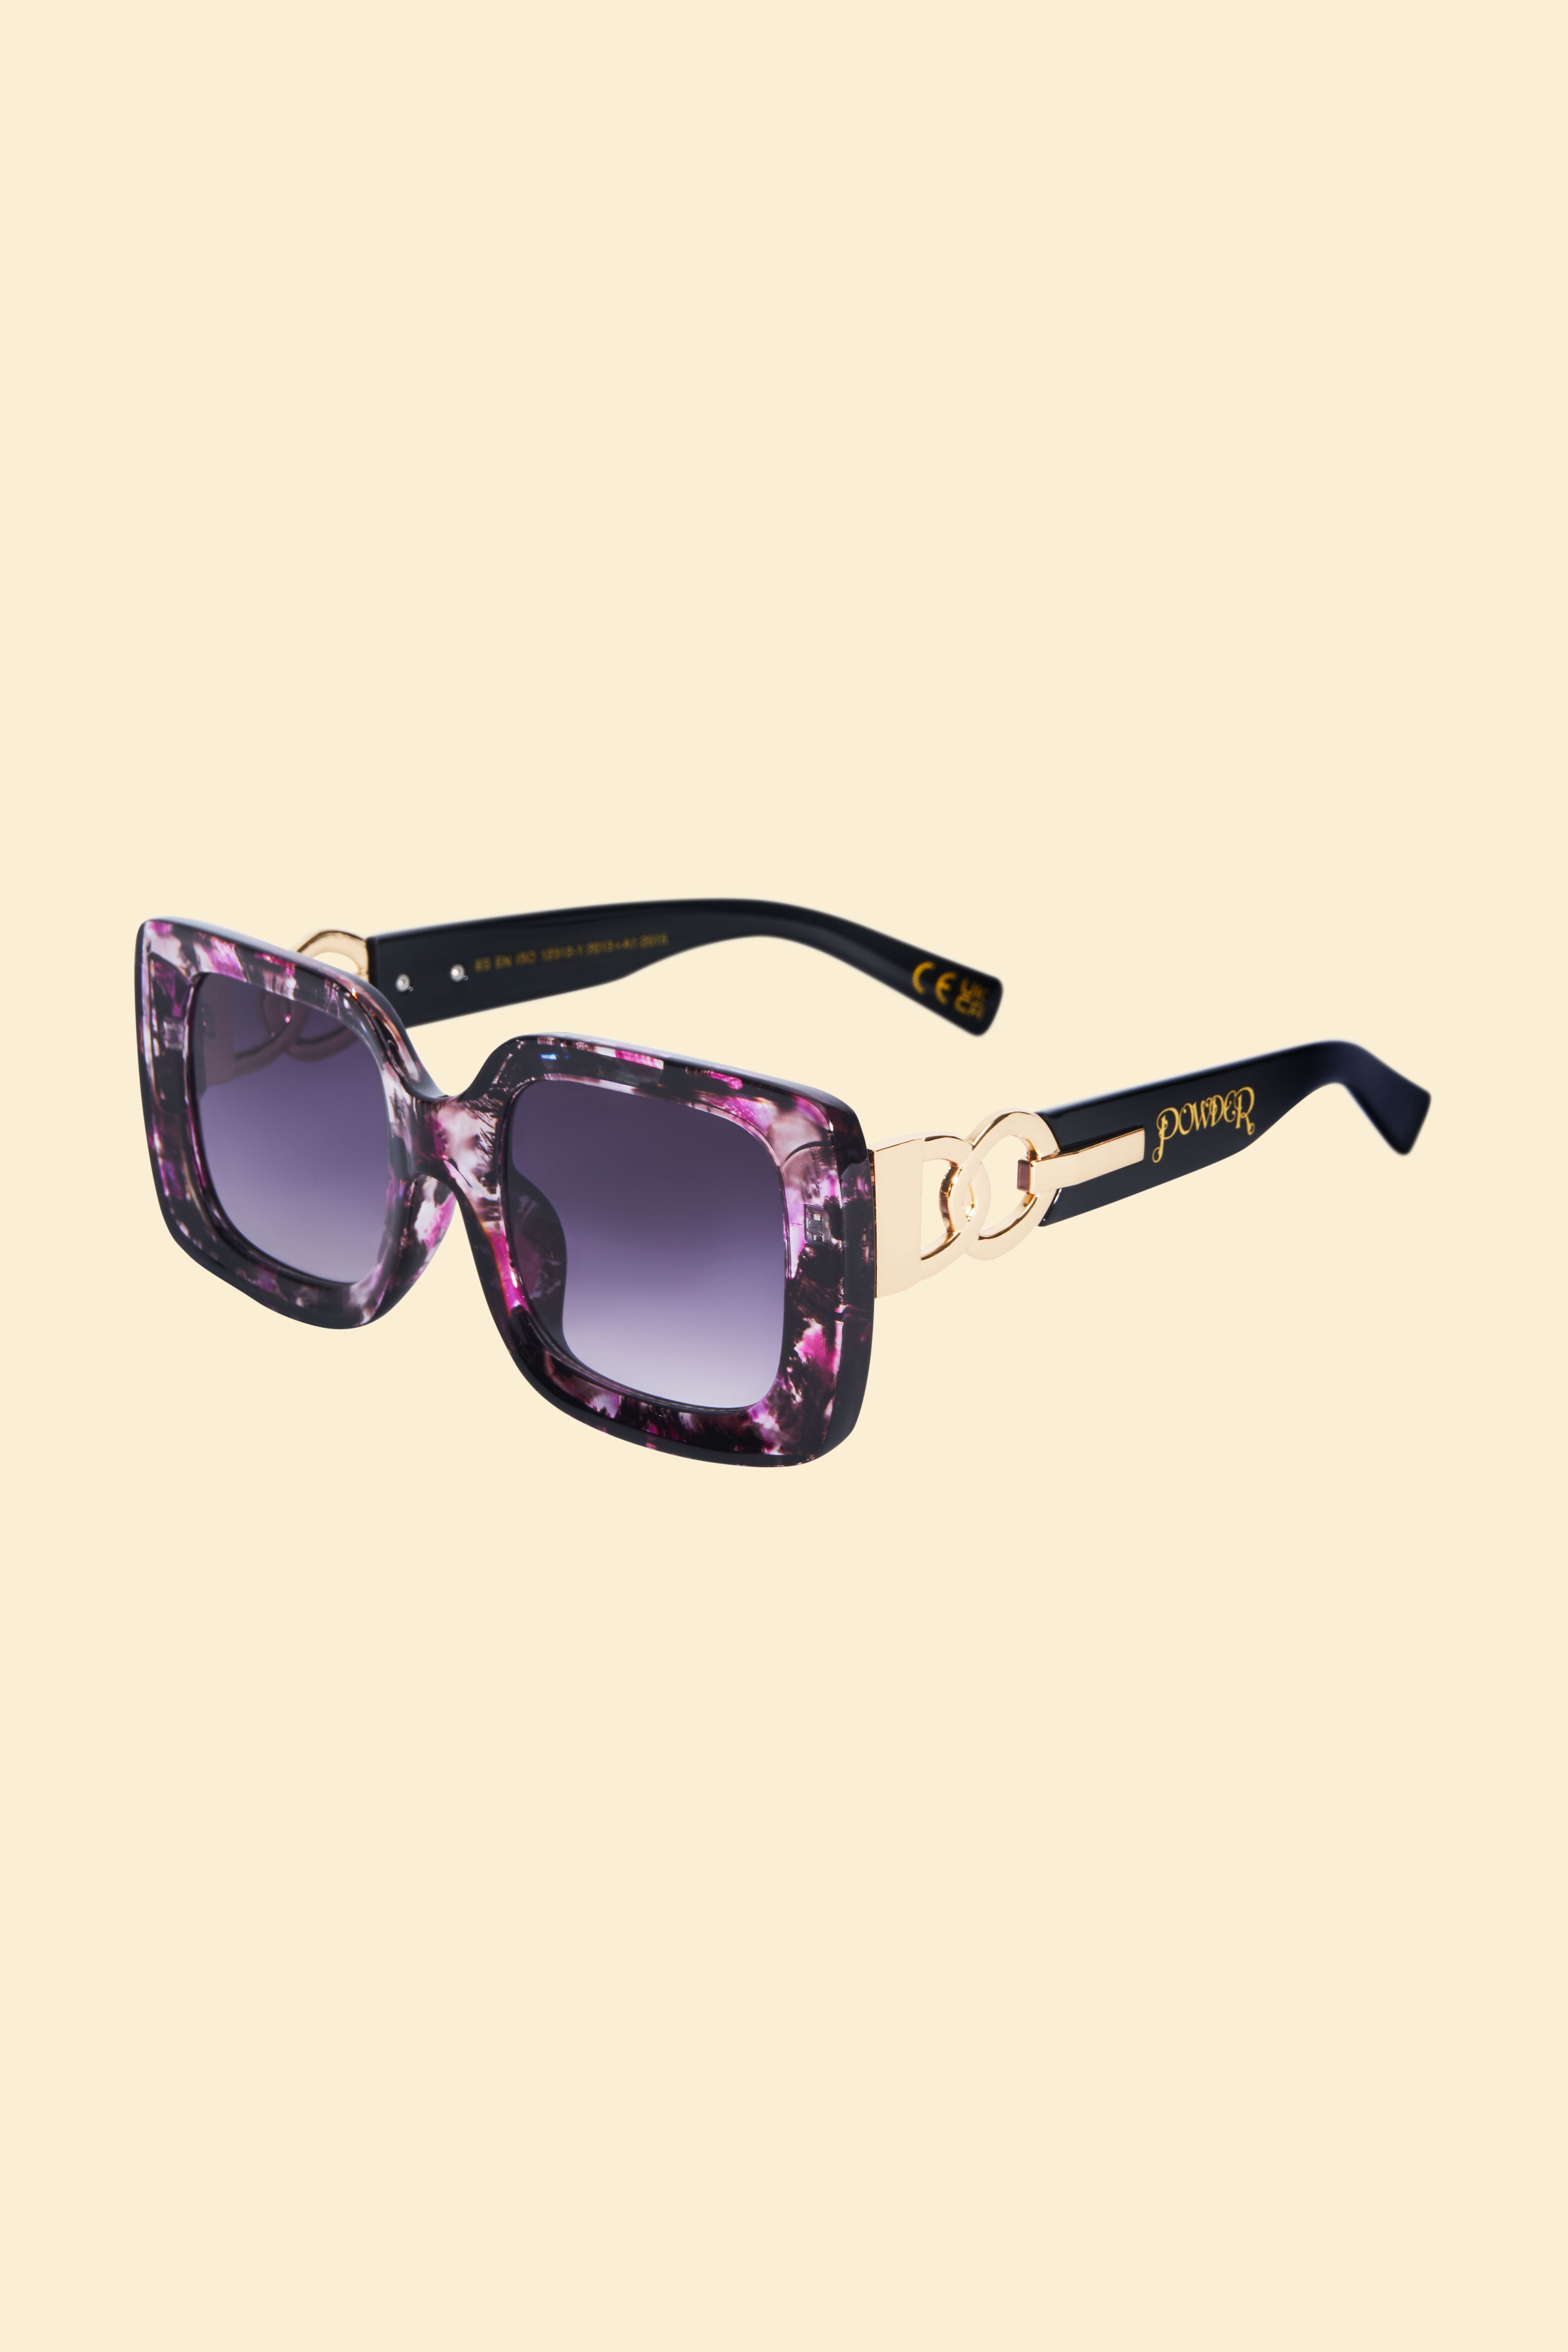 Sunglasses, Luxe & Limited Edition